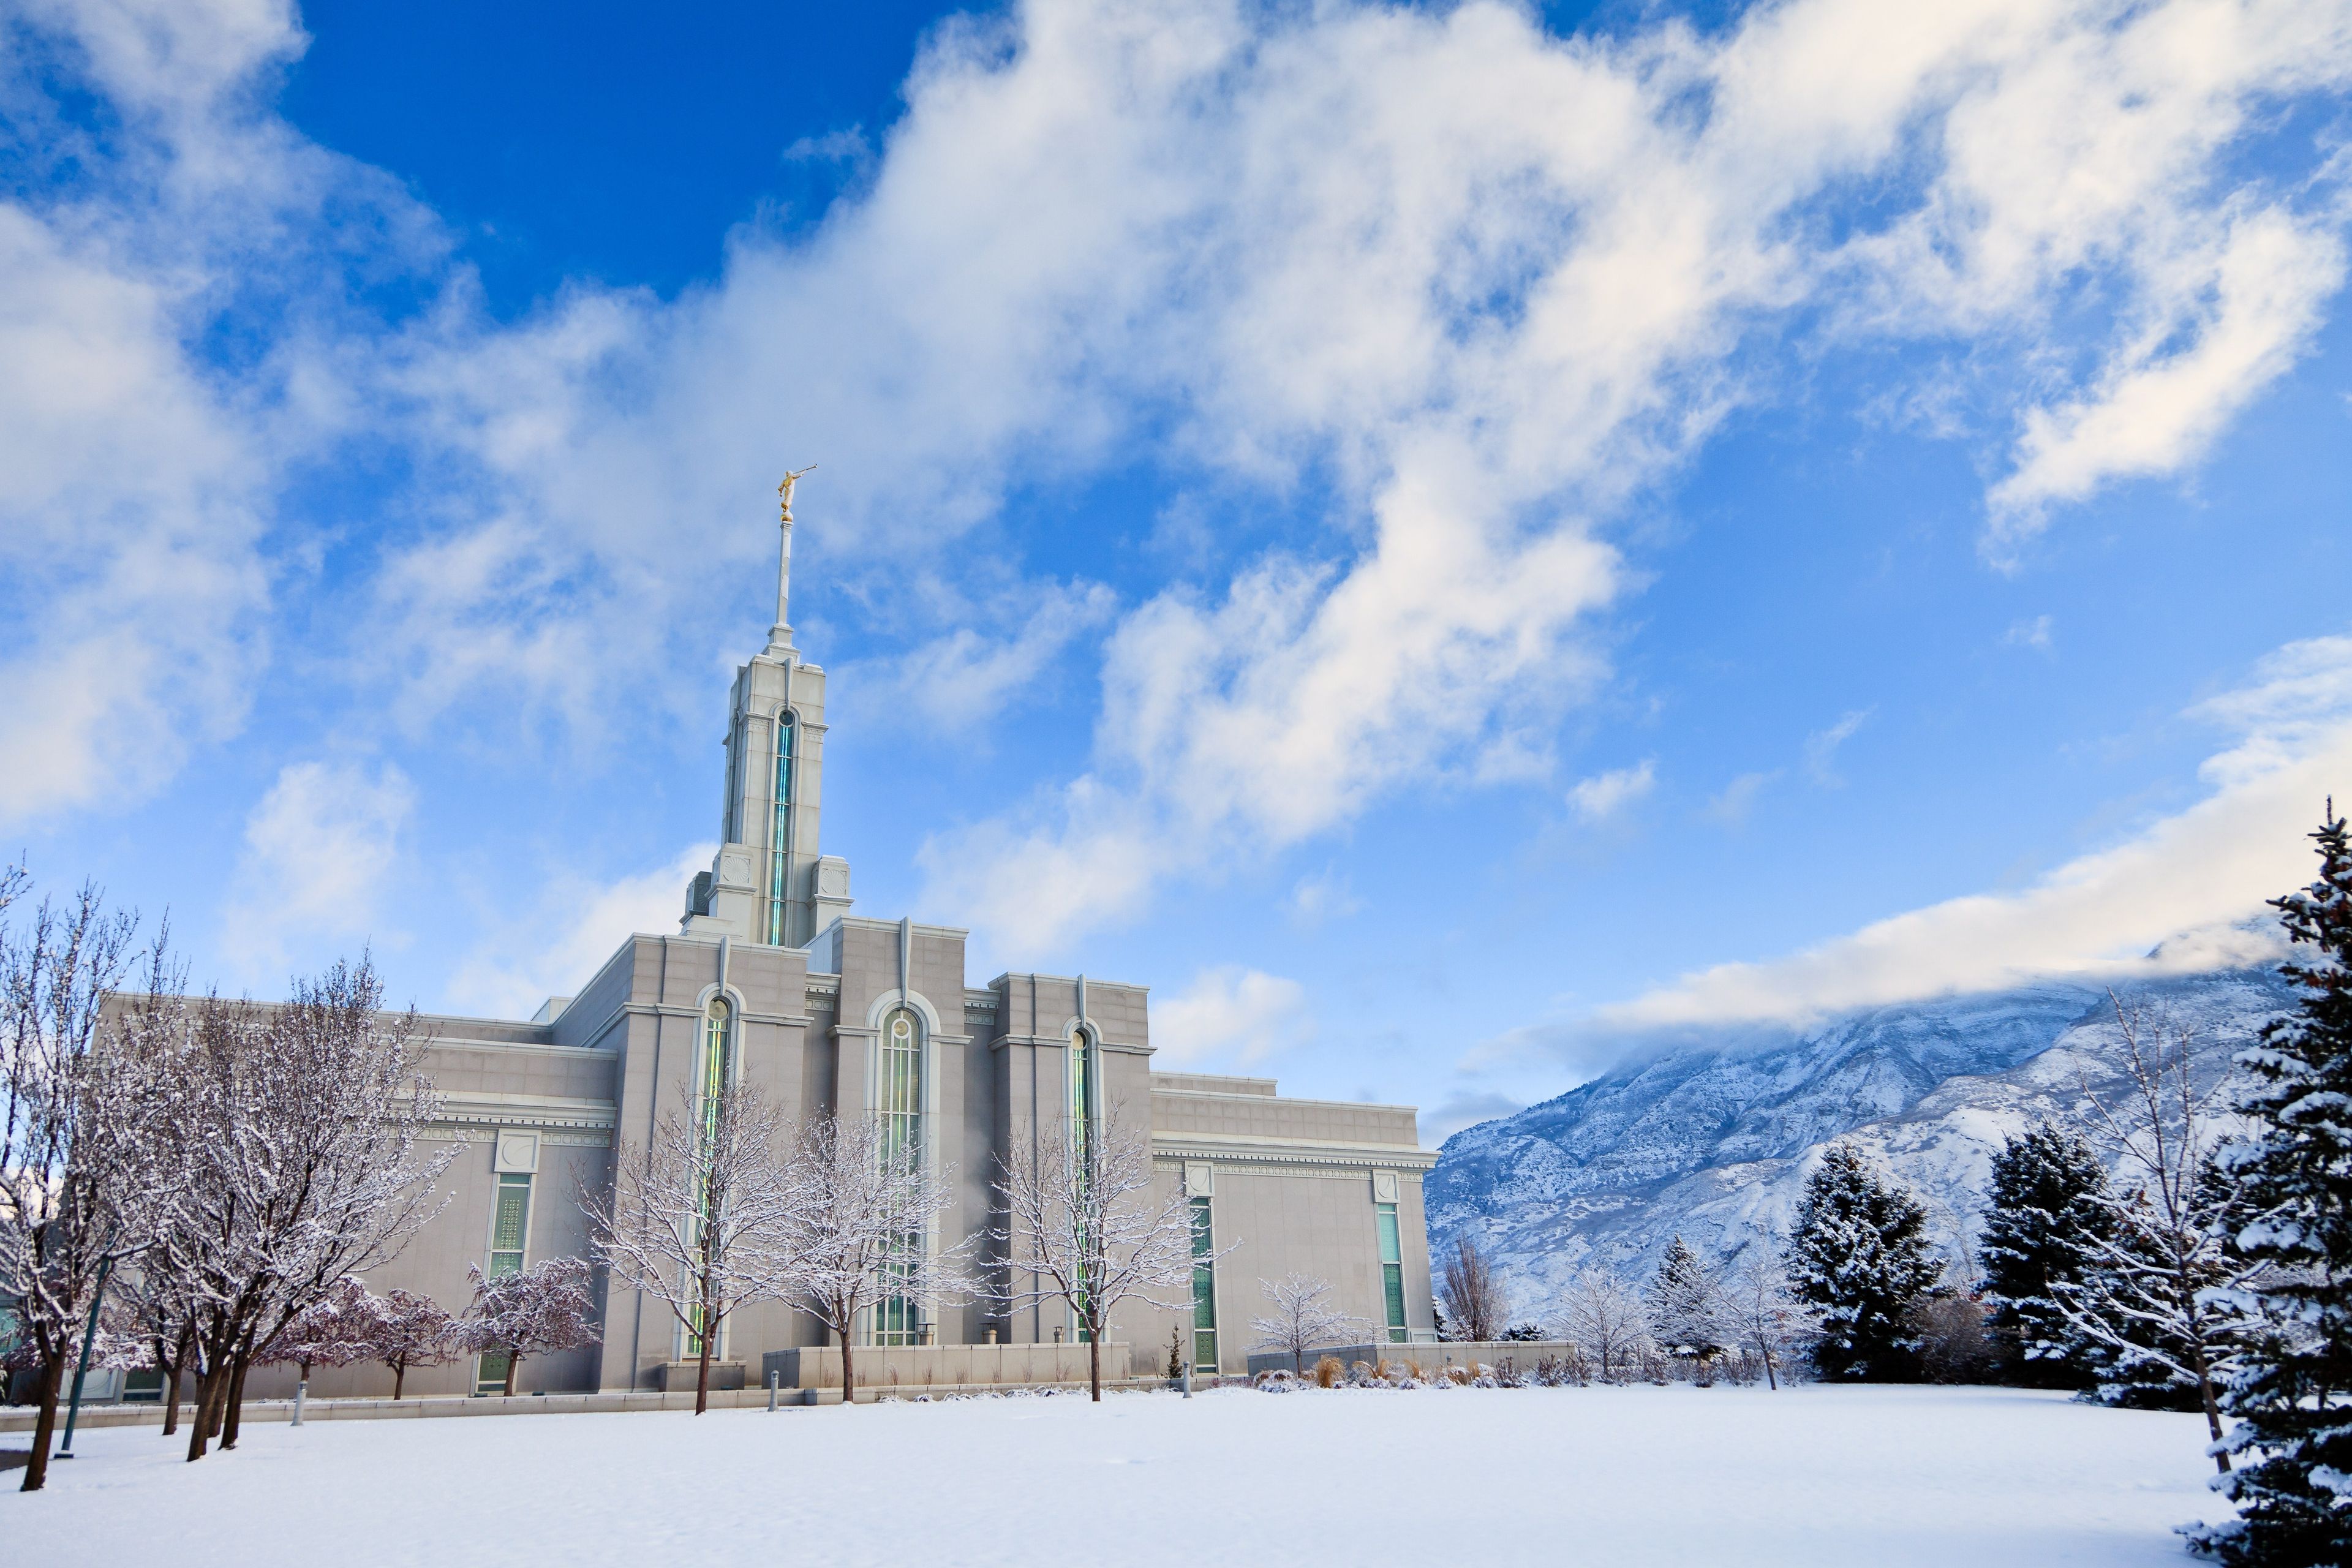 The Mount Timpanogos Utah Temple in the winter, including scenery.